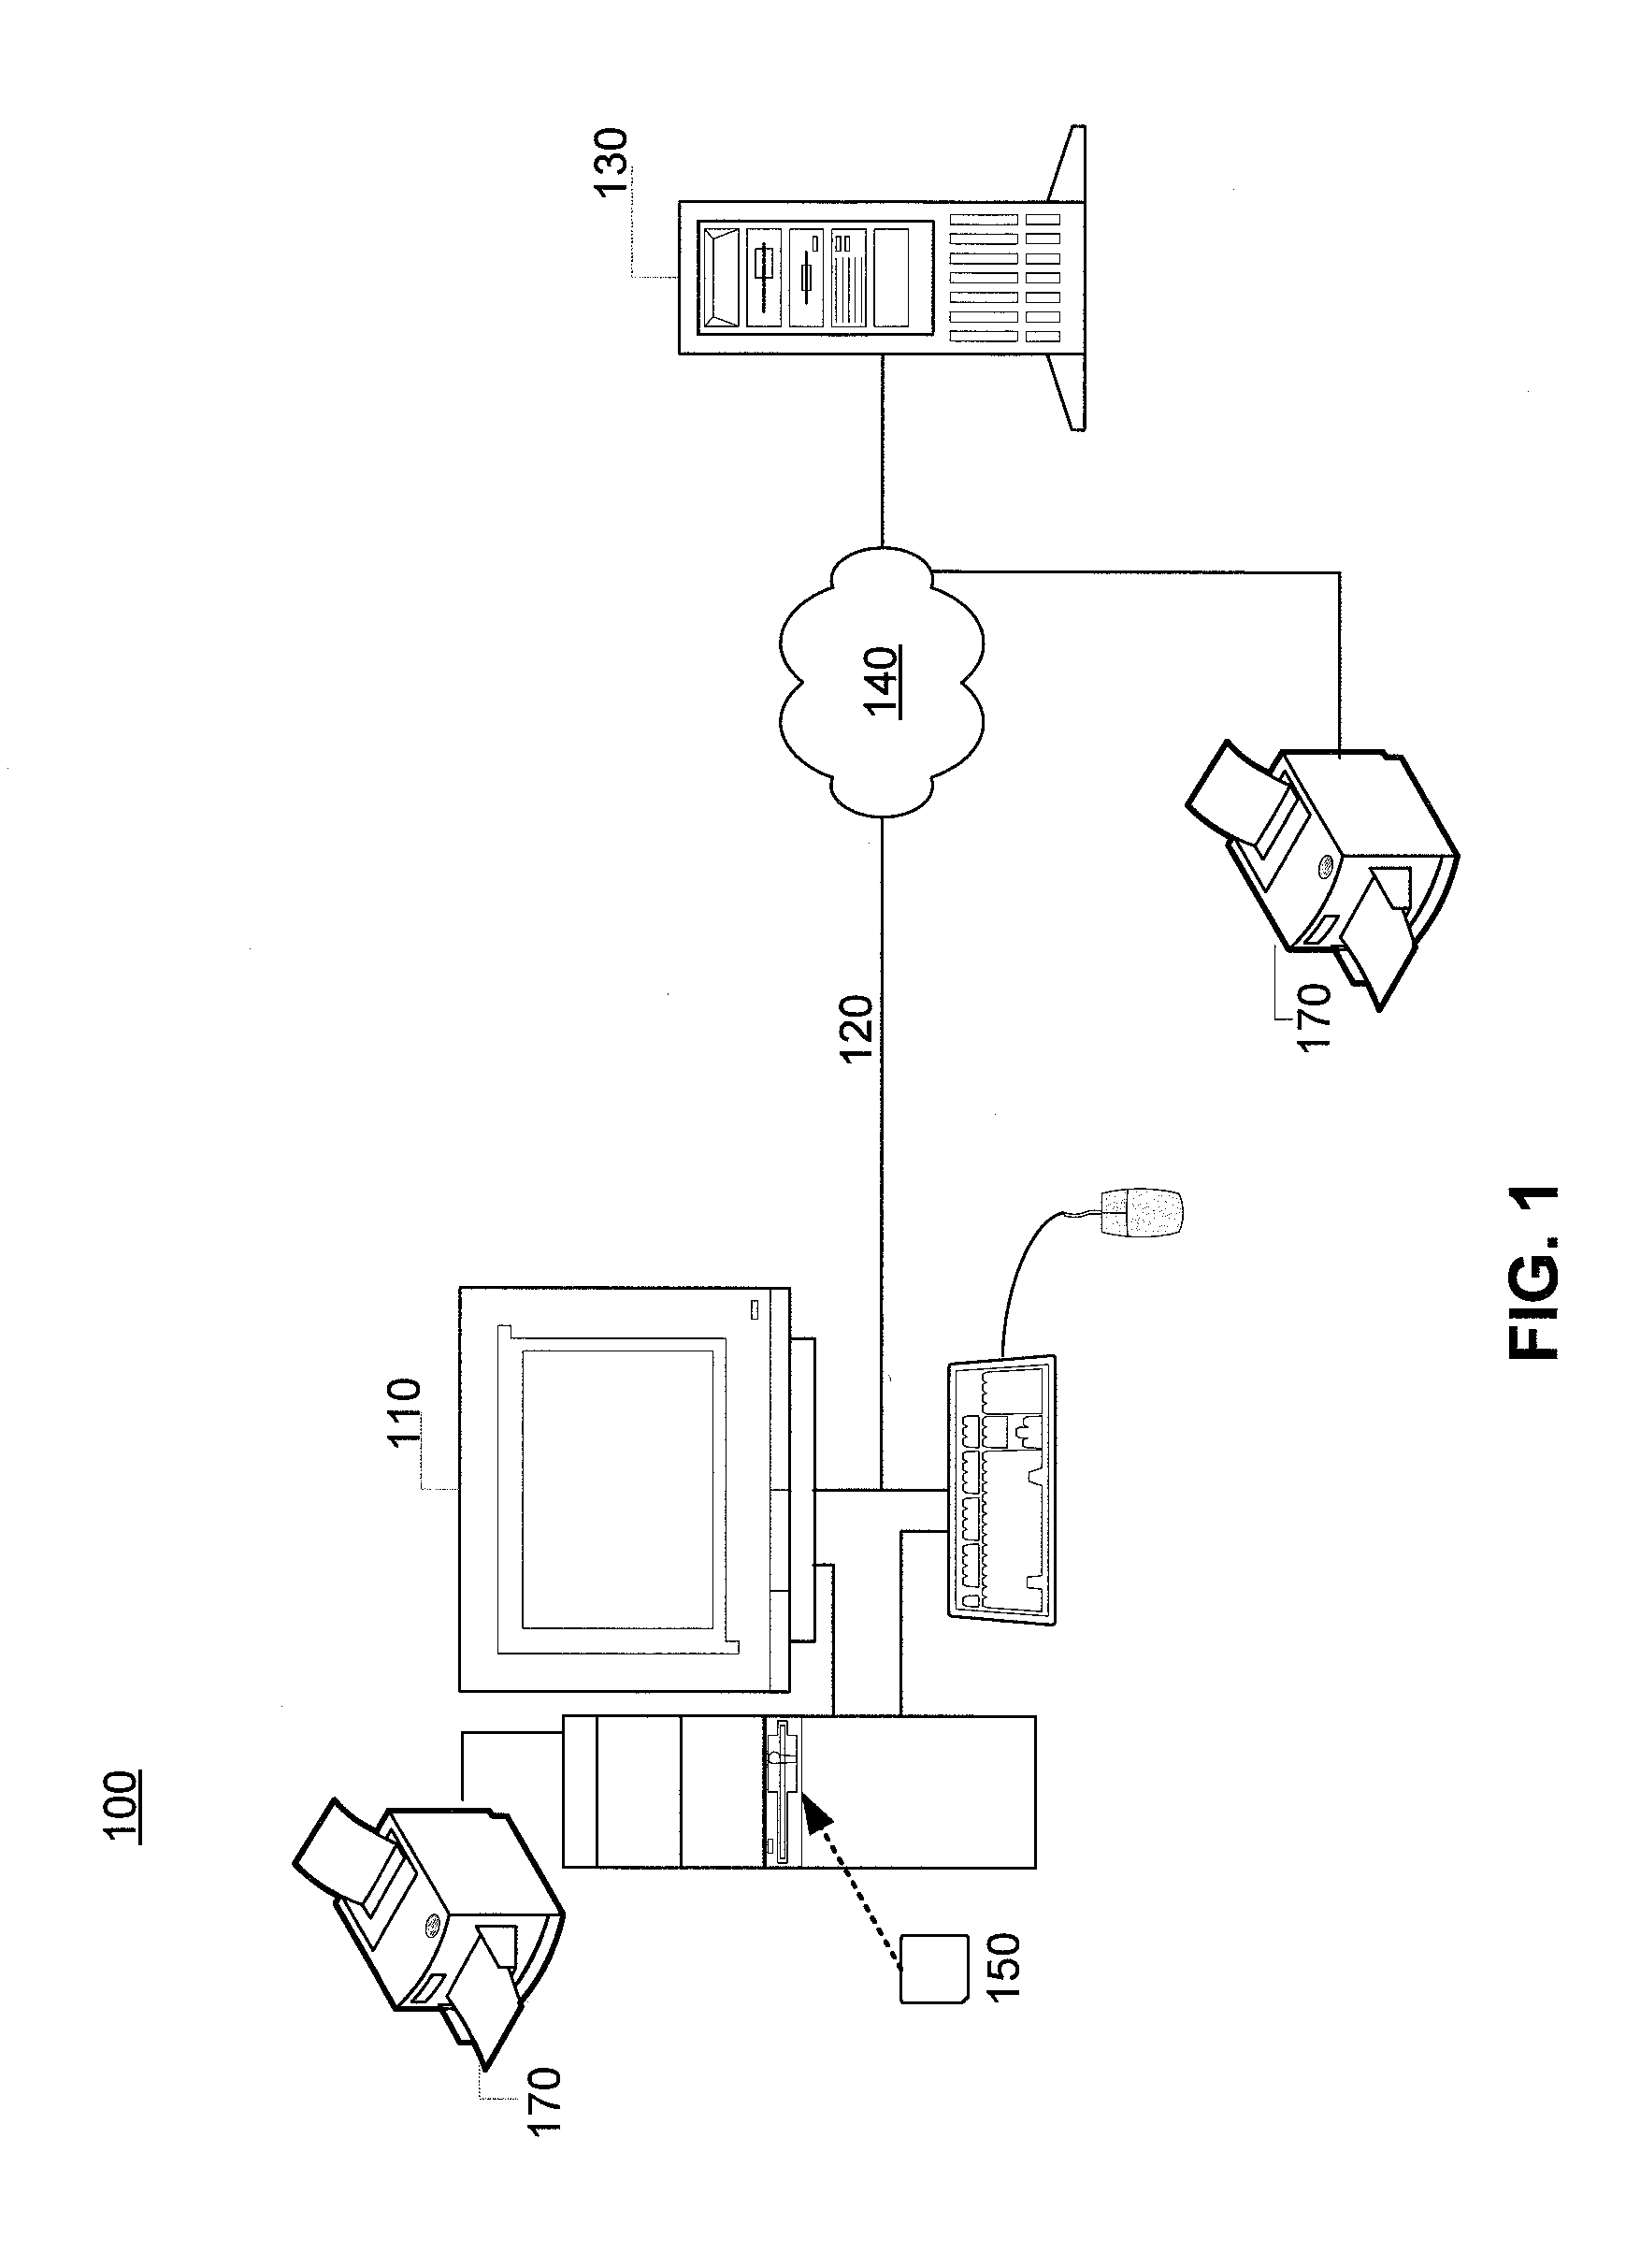 Systems and Methods for Processing Packaged Print Data Streams